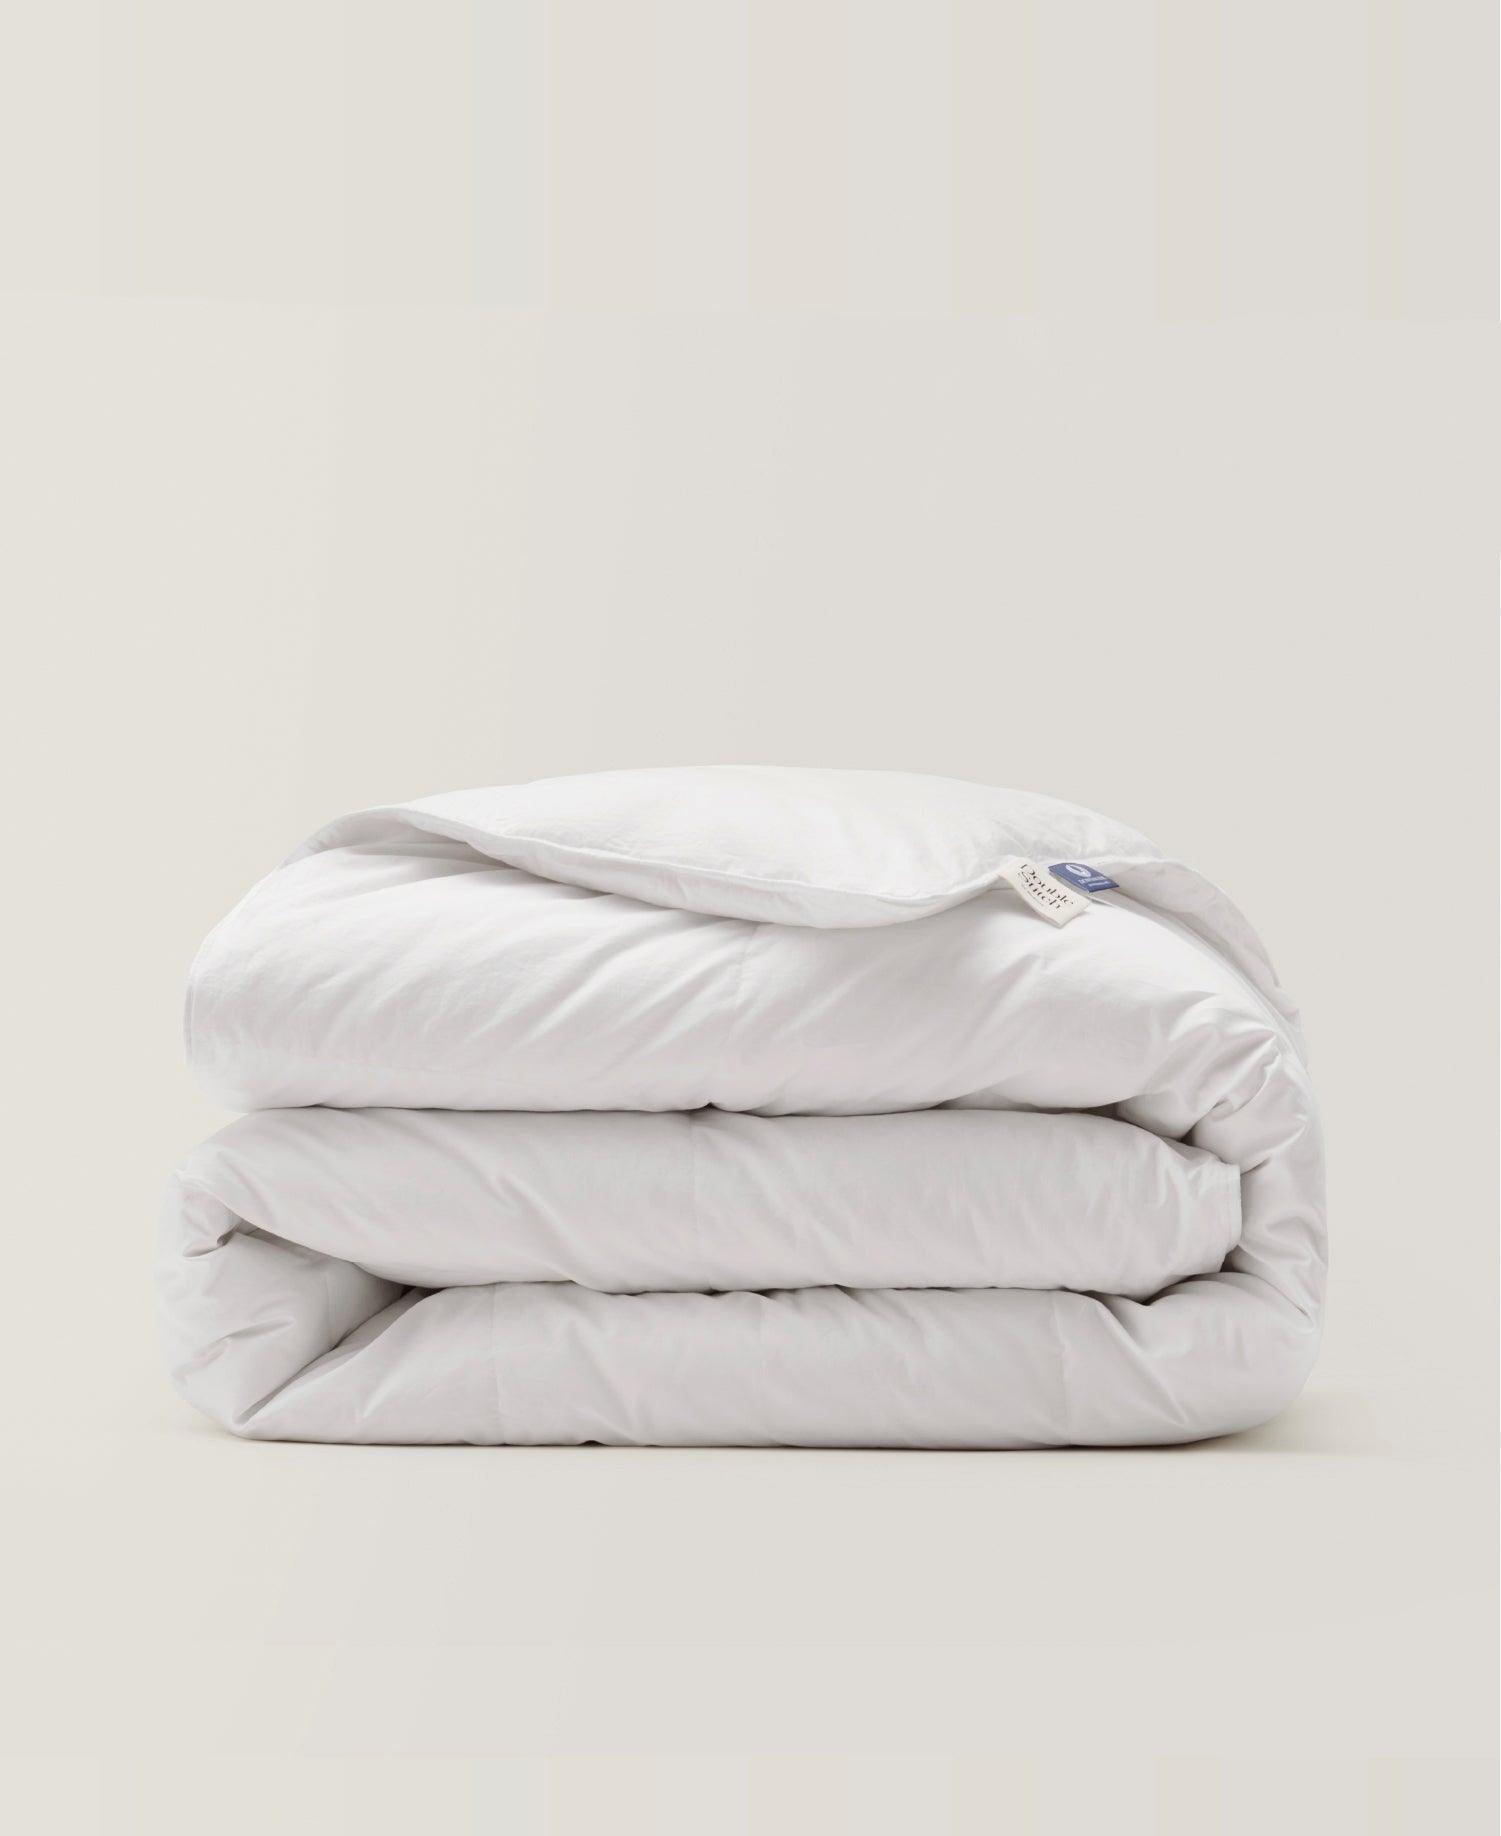 Duvet Insert-80 White Duck Down - Double Stitch By Bedsure